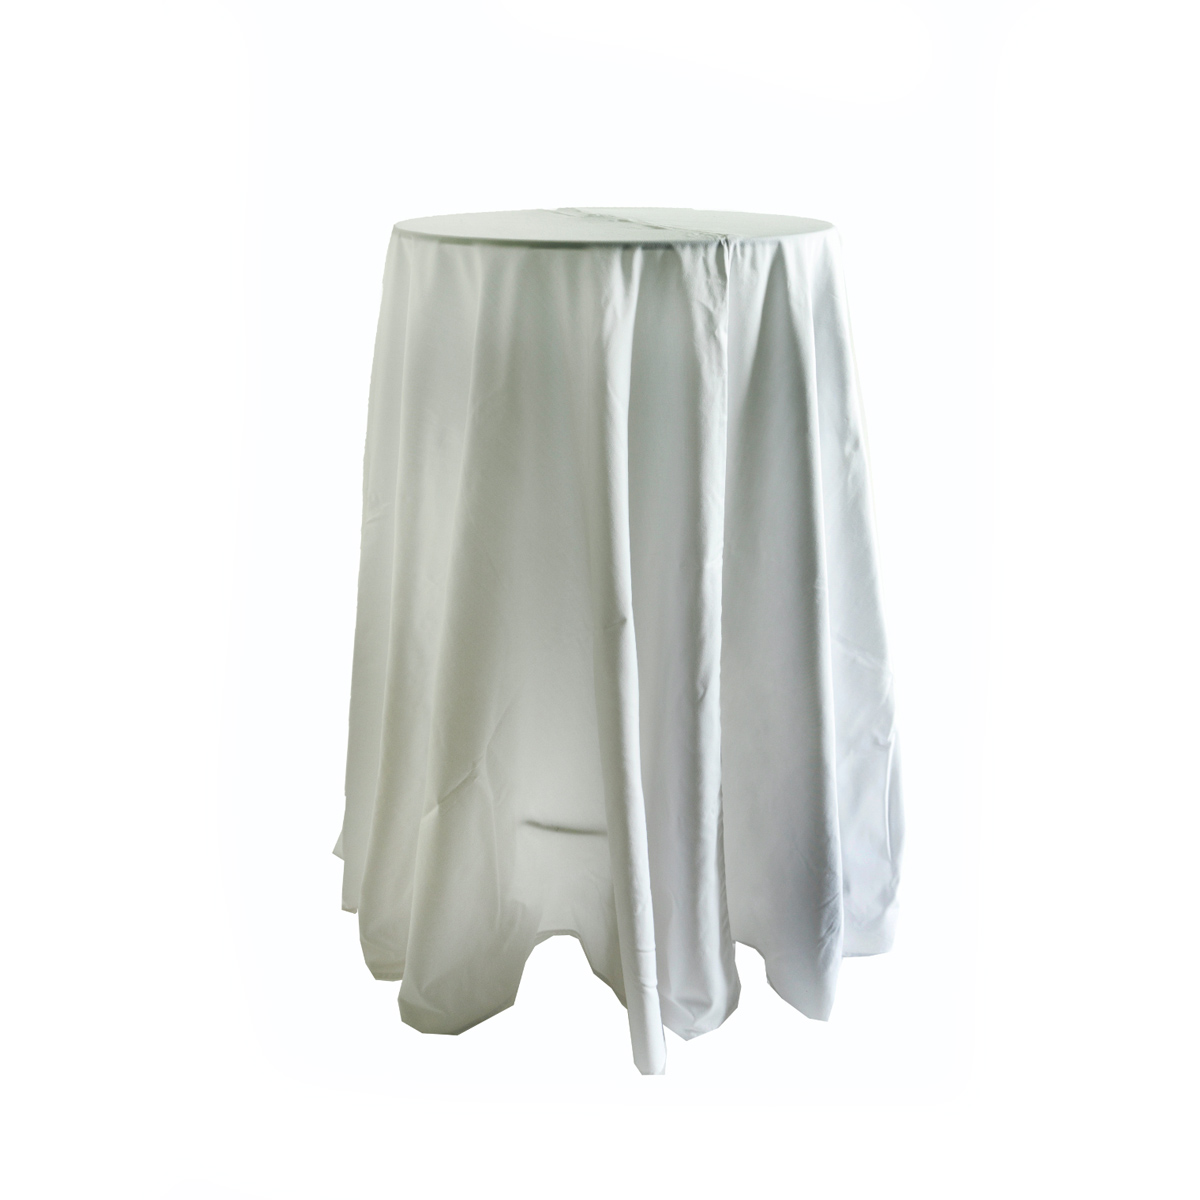  White Tablecloth 